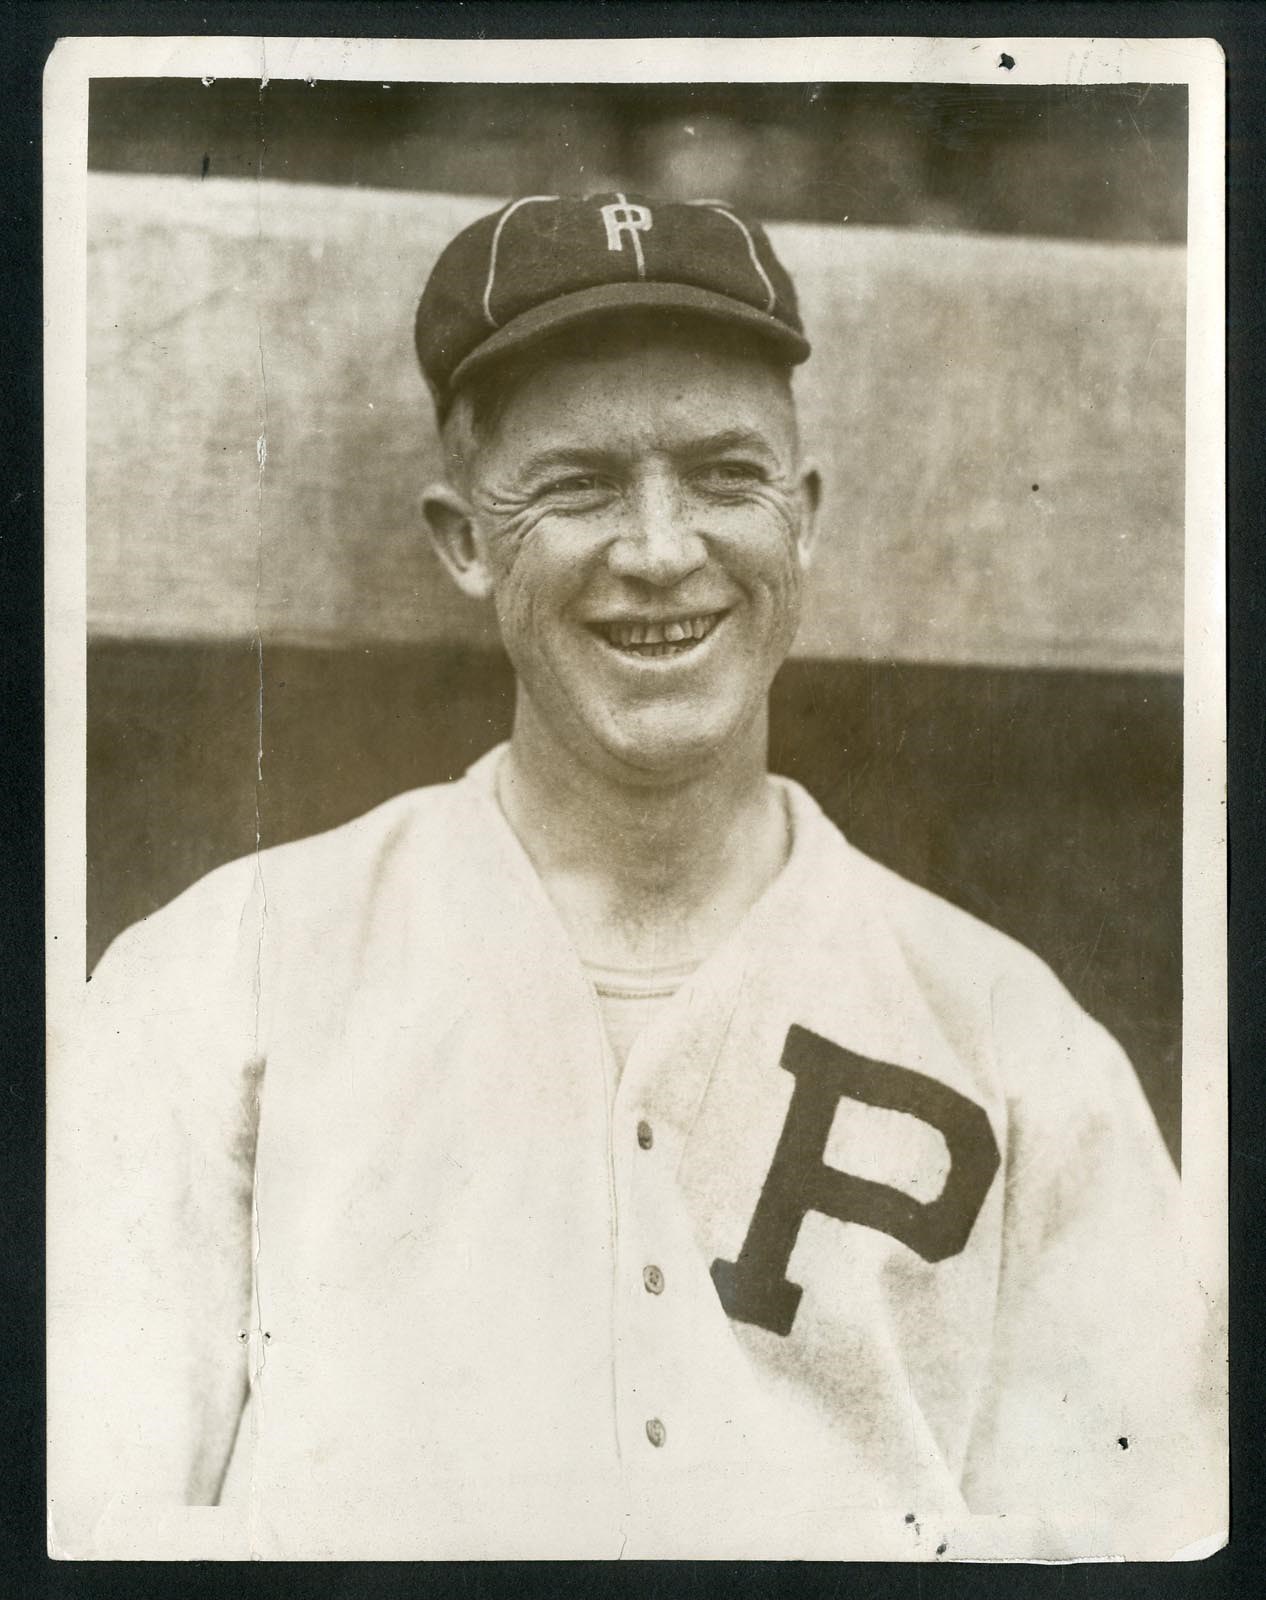 - Early Grover Cleveland Alexander Photo From "The Ring"